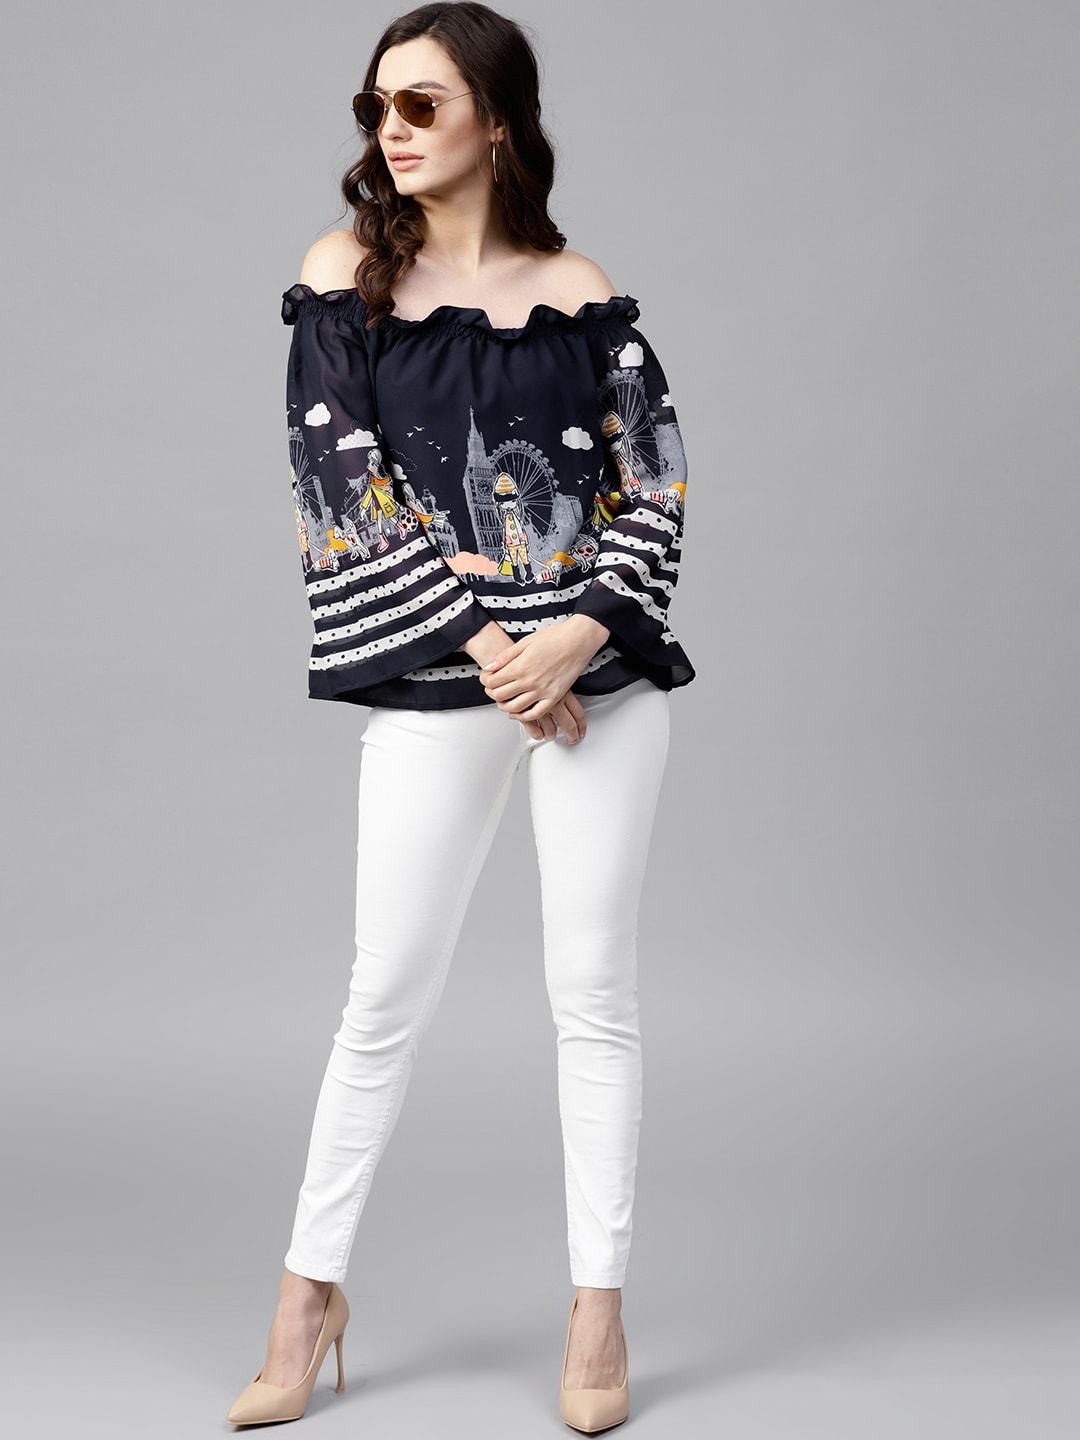 Women's Off-Shoulder Fusion Printed Top - Pannkh